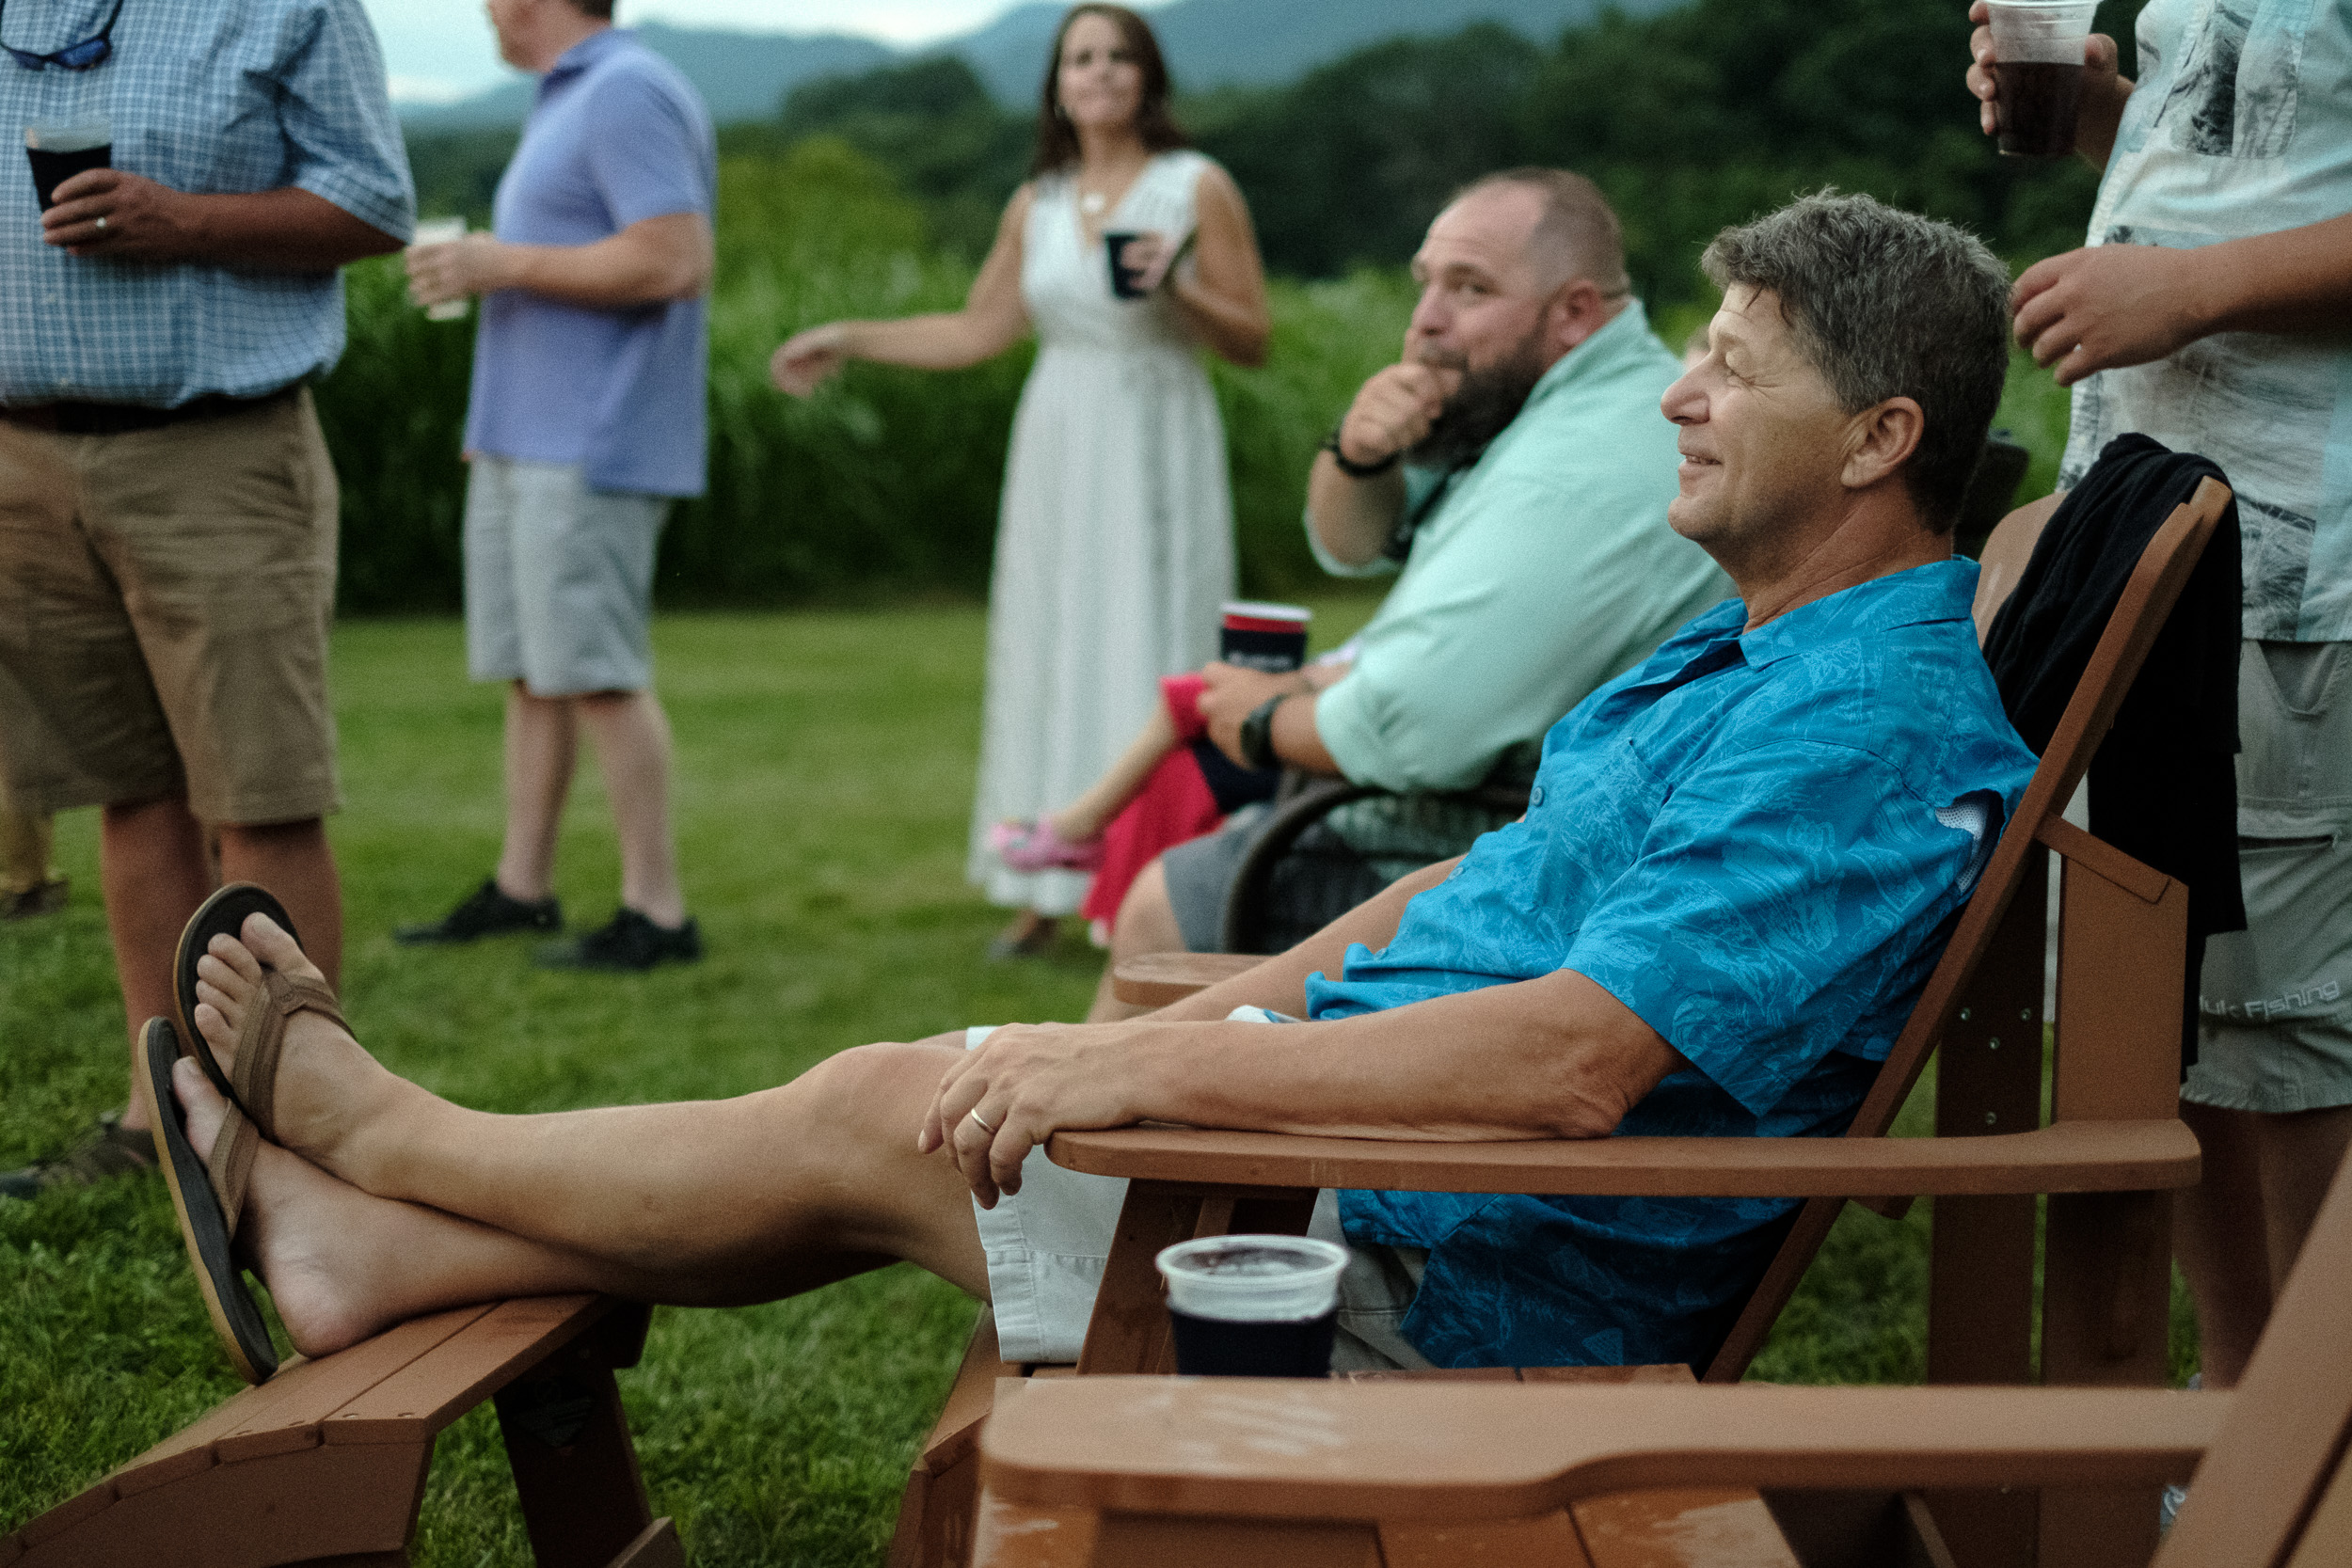 documentary wedding photography wedding guest relaxing in lawn chair - Virginia documentary wedding photographer - fly on the wall style photography